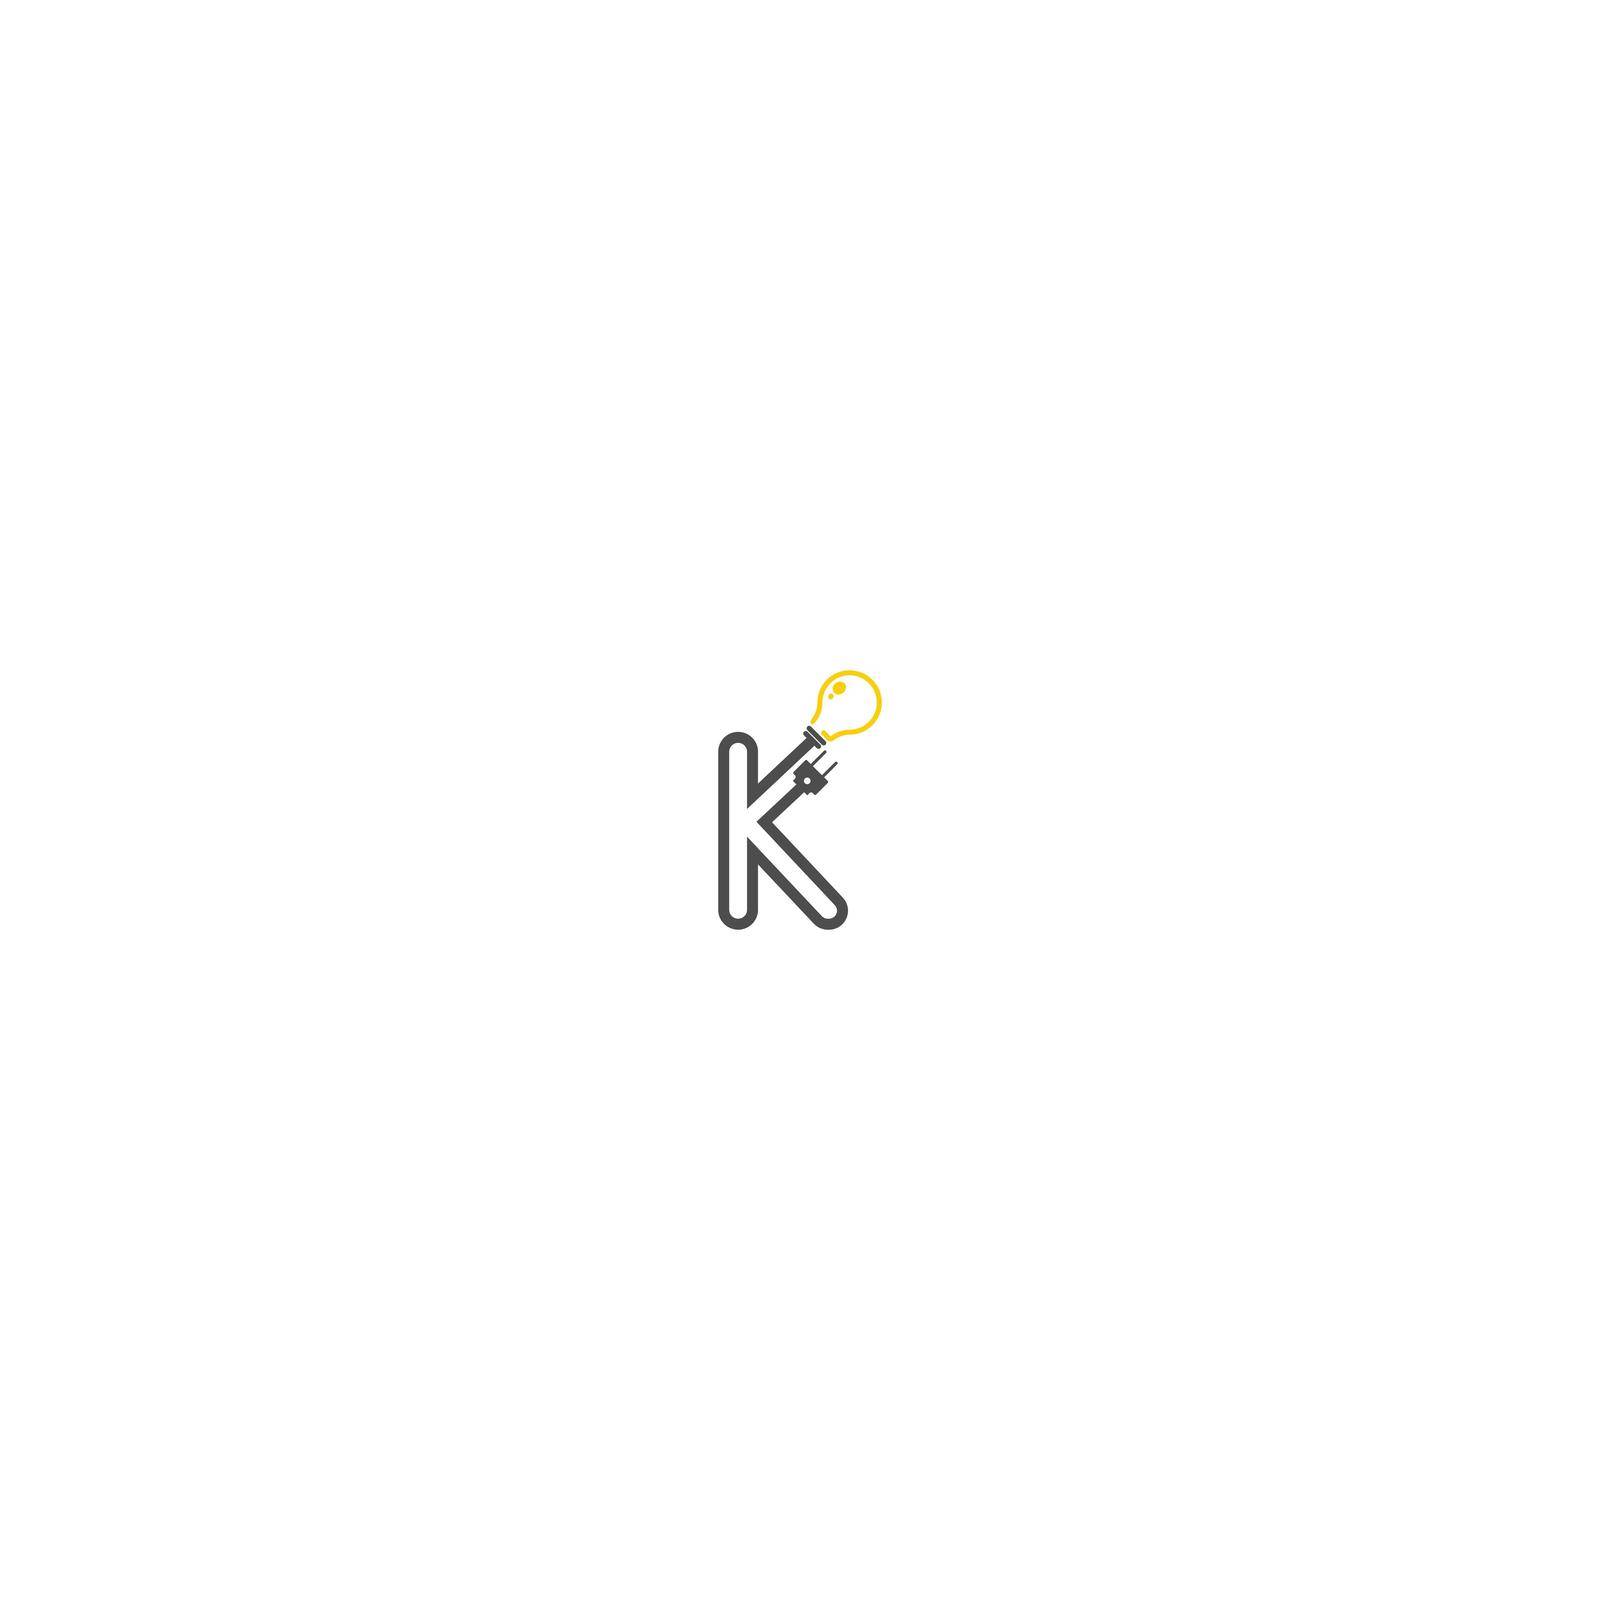 Letter K and podcast logotype by bellaxbudhong3